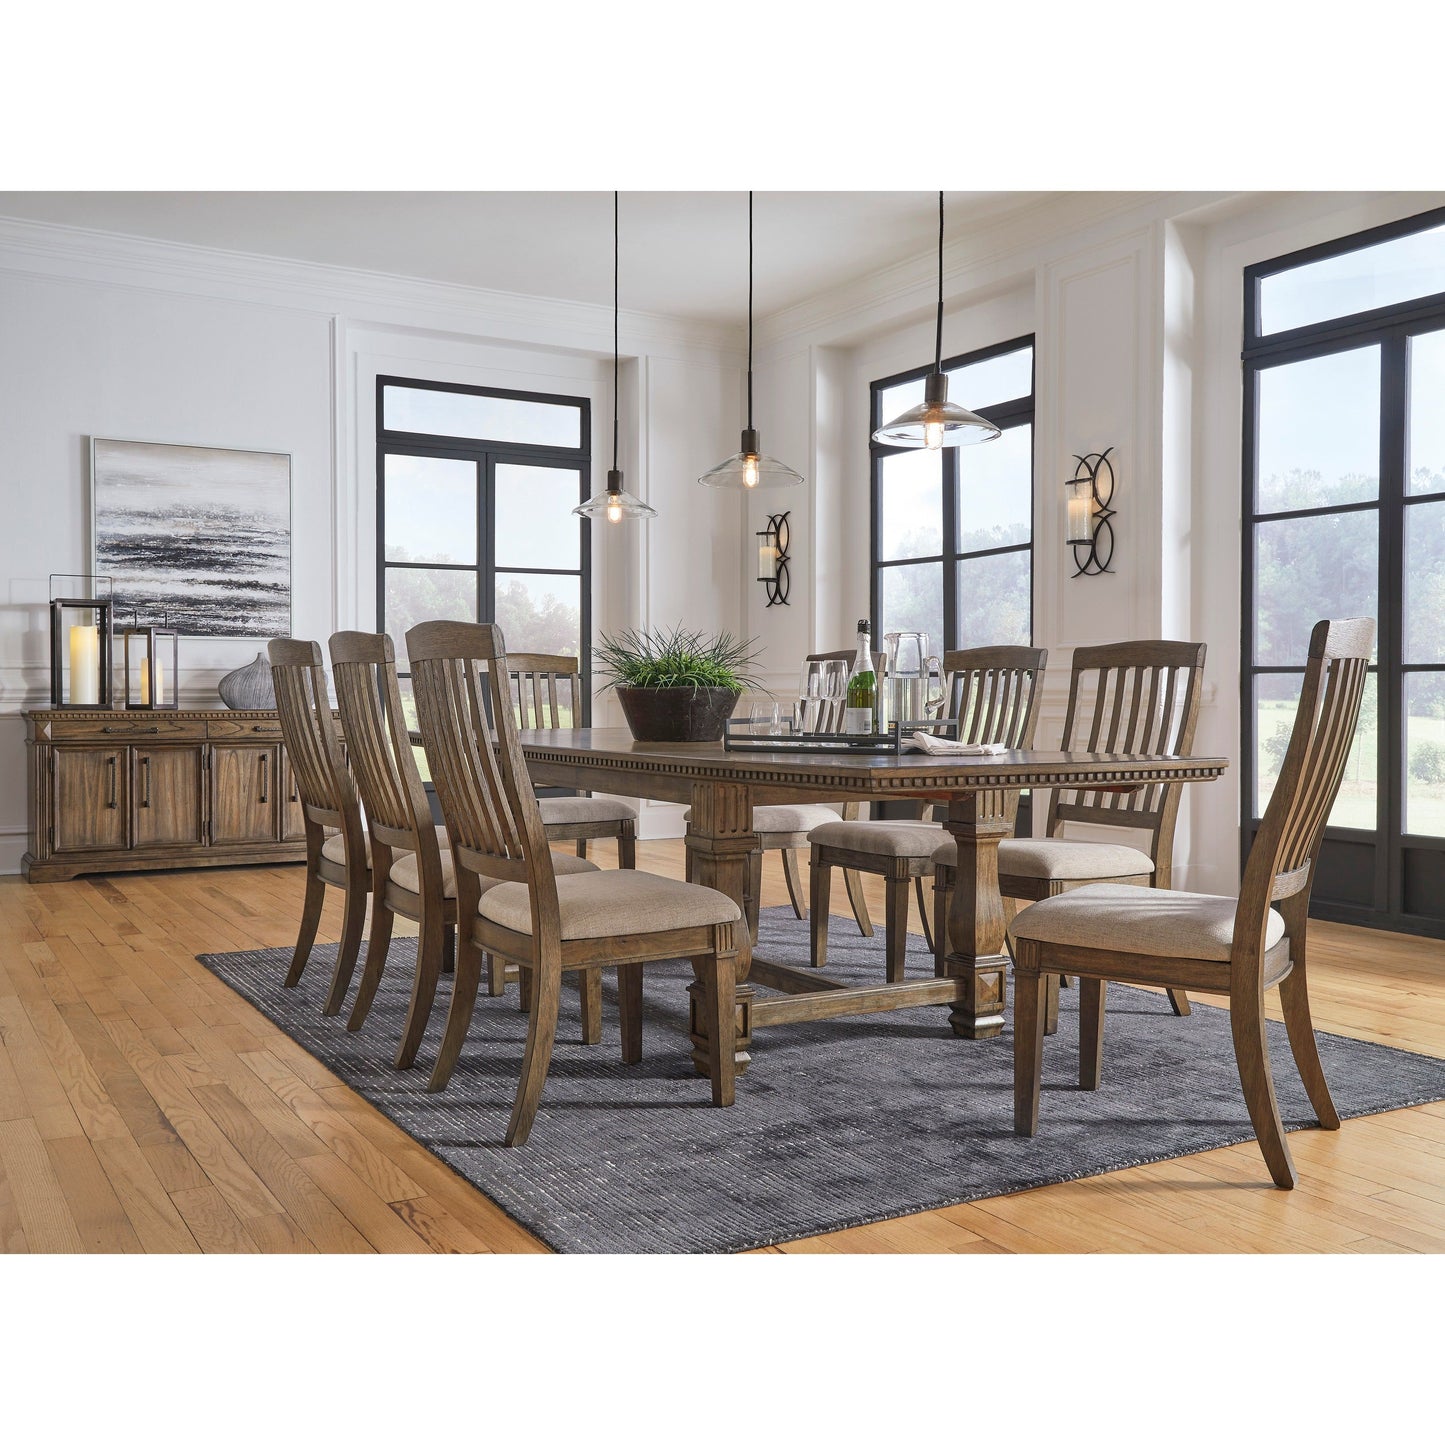 MARKENBURG EXTENSION DINING TABLE - BROWN